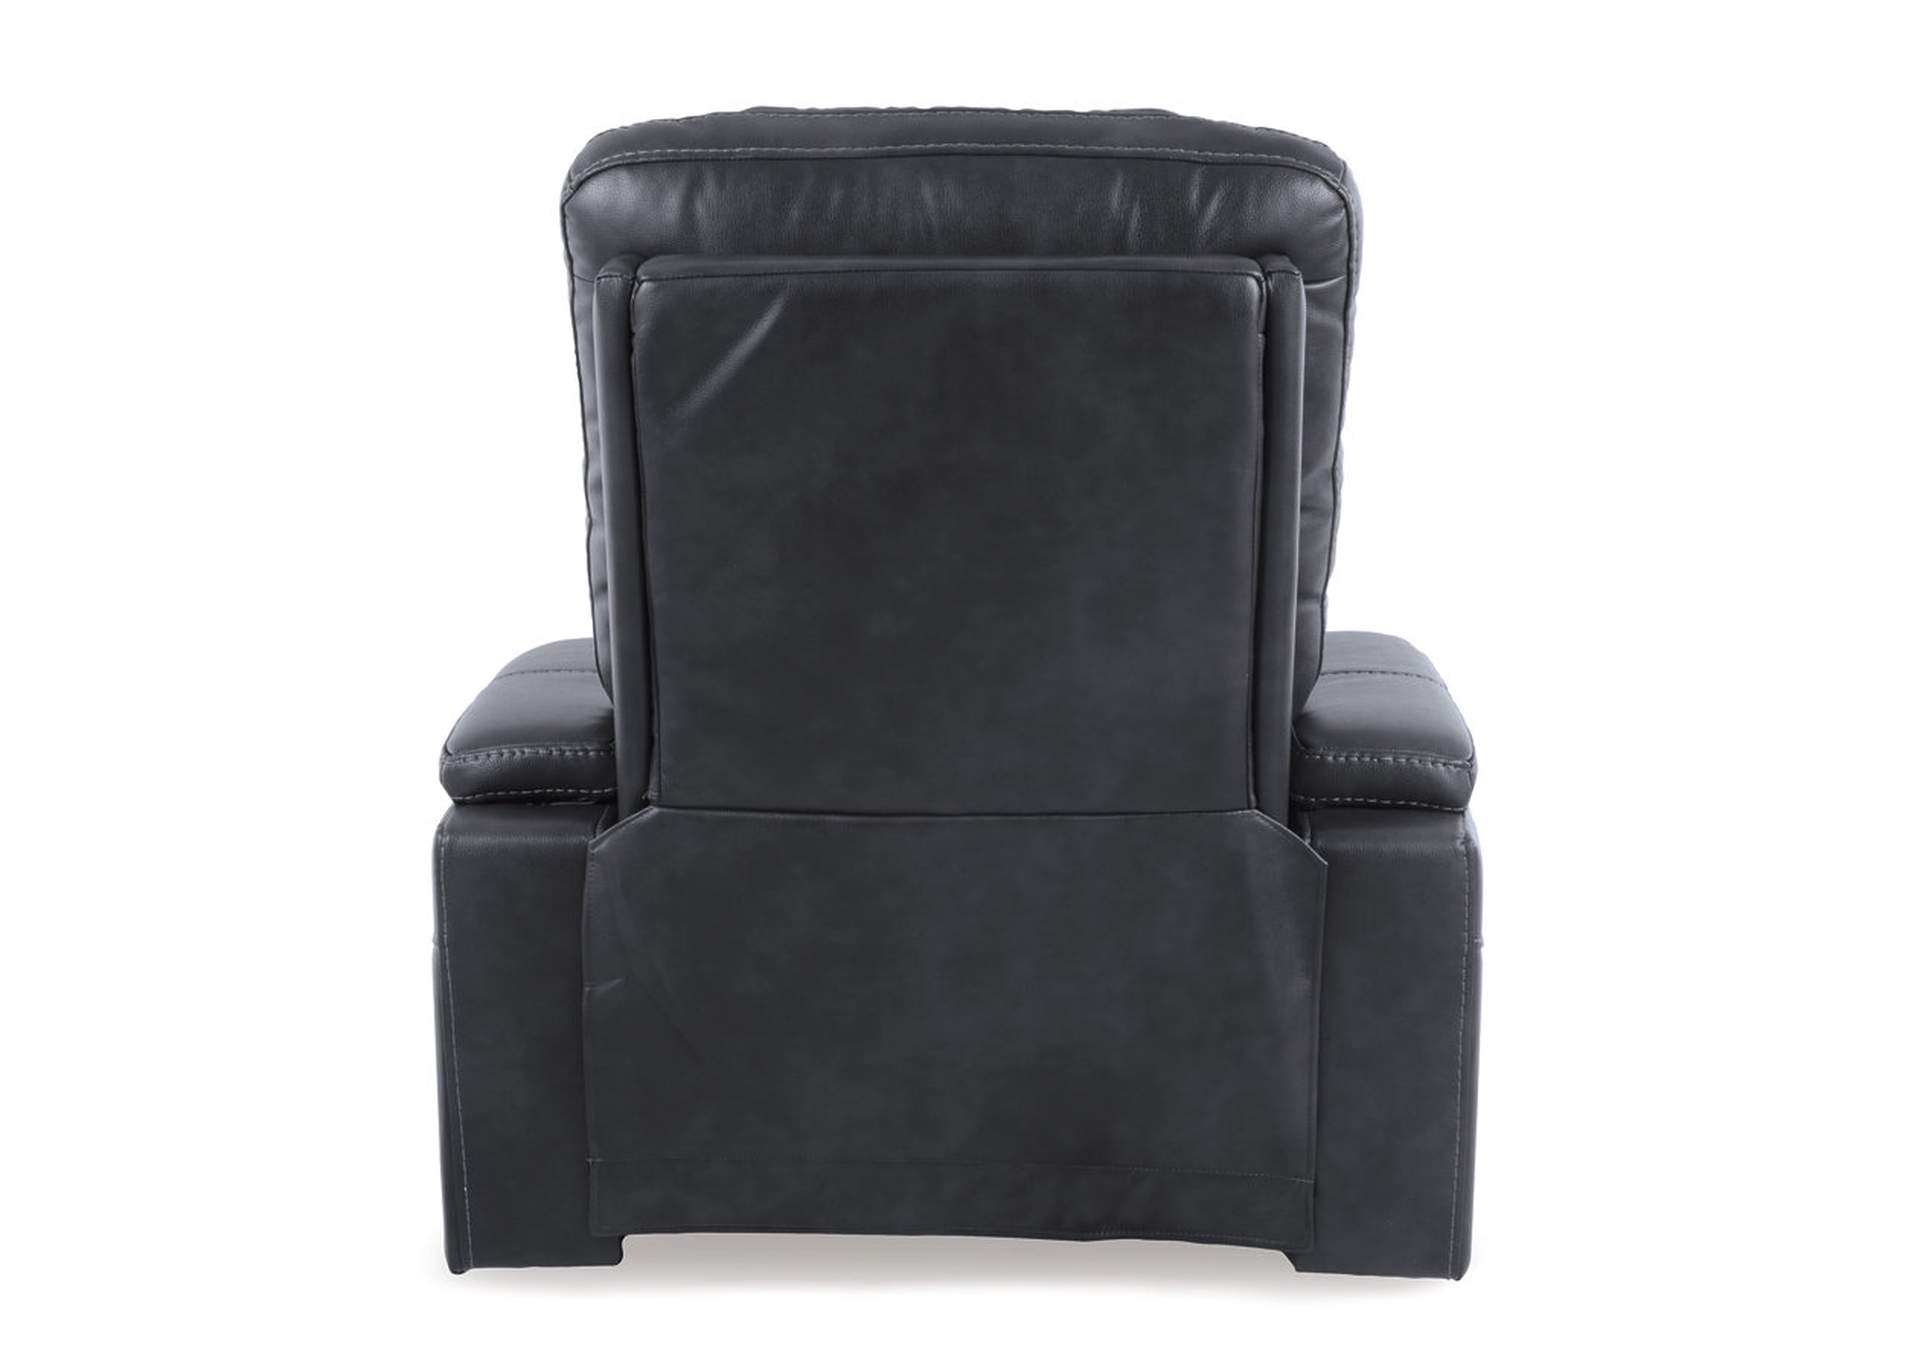 Composer 3-Piece Home Theater Seating,Signature Design By Ashley